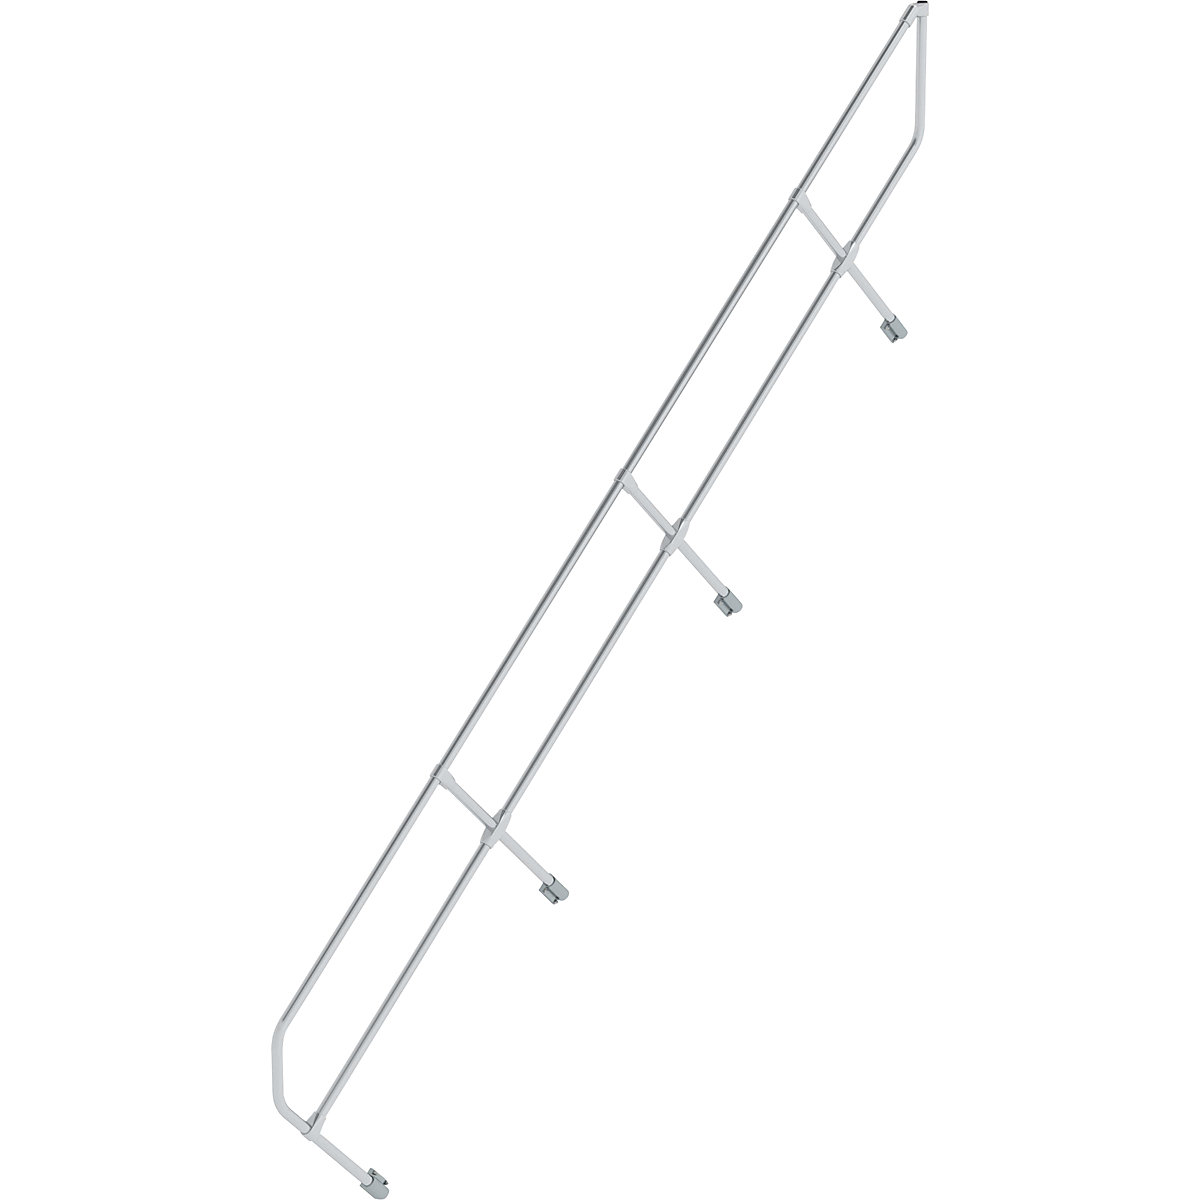 Second railing – MUNK, for industrial steps with a 45° slope, 14 steps-6